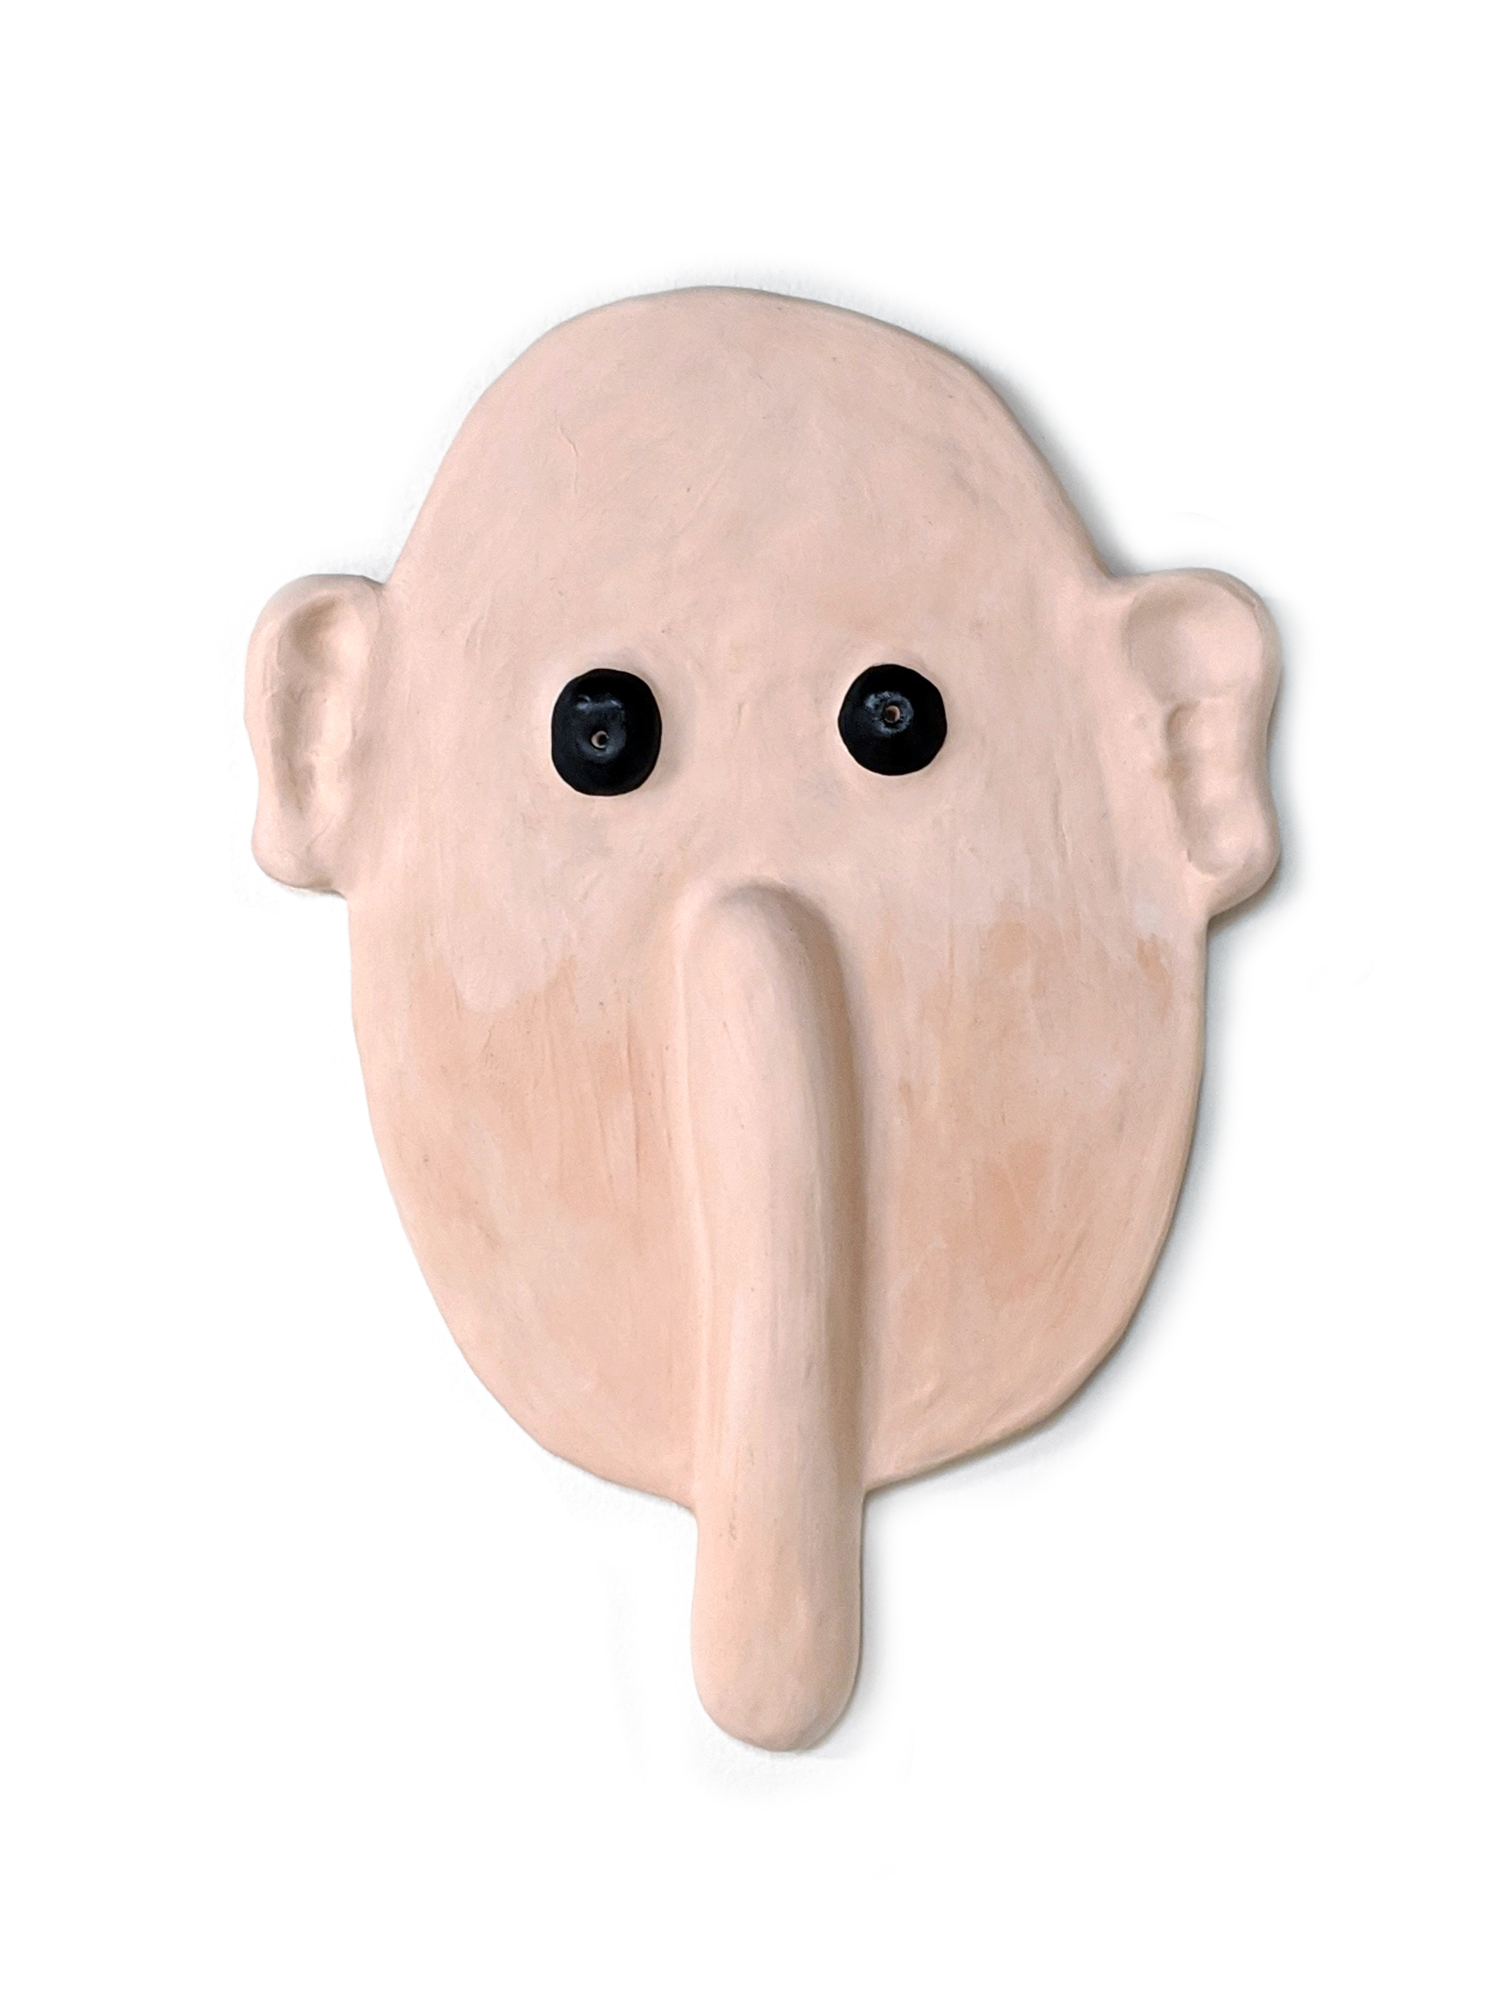 Deric Carner, "Mask with Long Nose," 2020 Pigmented plaster and acrylic 14 x 10 x 1 ½ inches